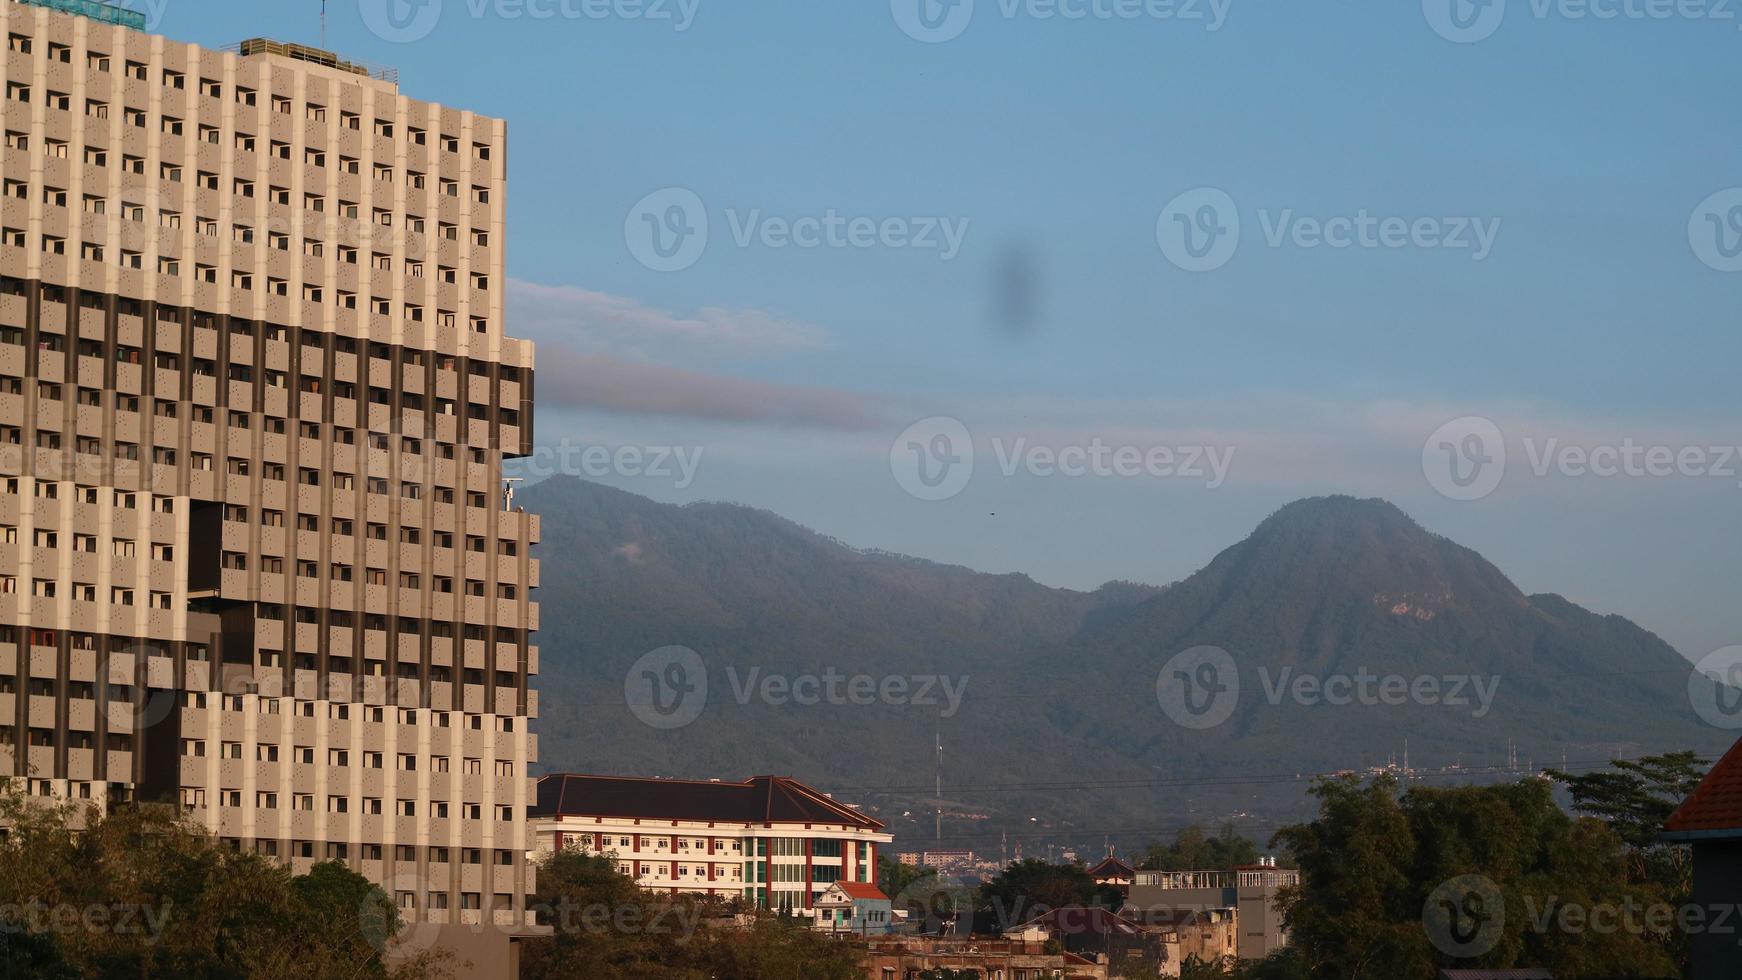 In the morning, you can see apartments next to residents' houses and adjacent to the mountain photo